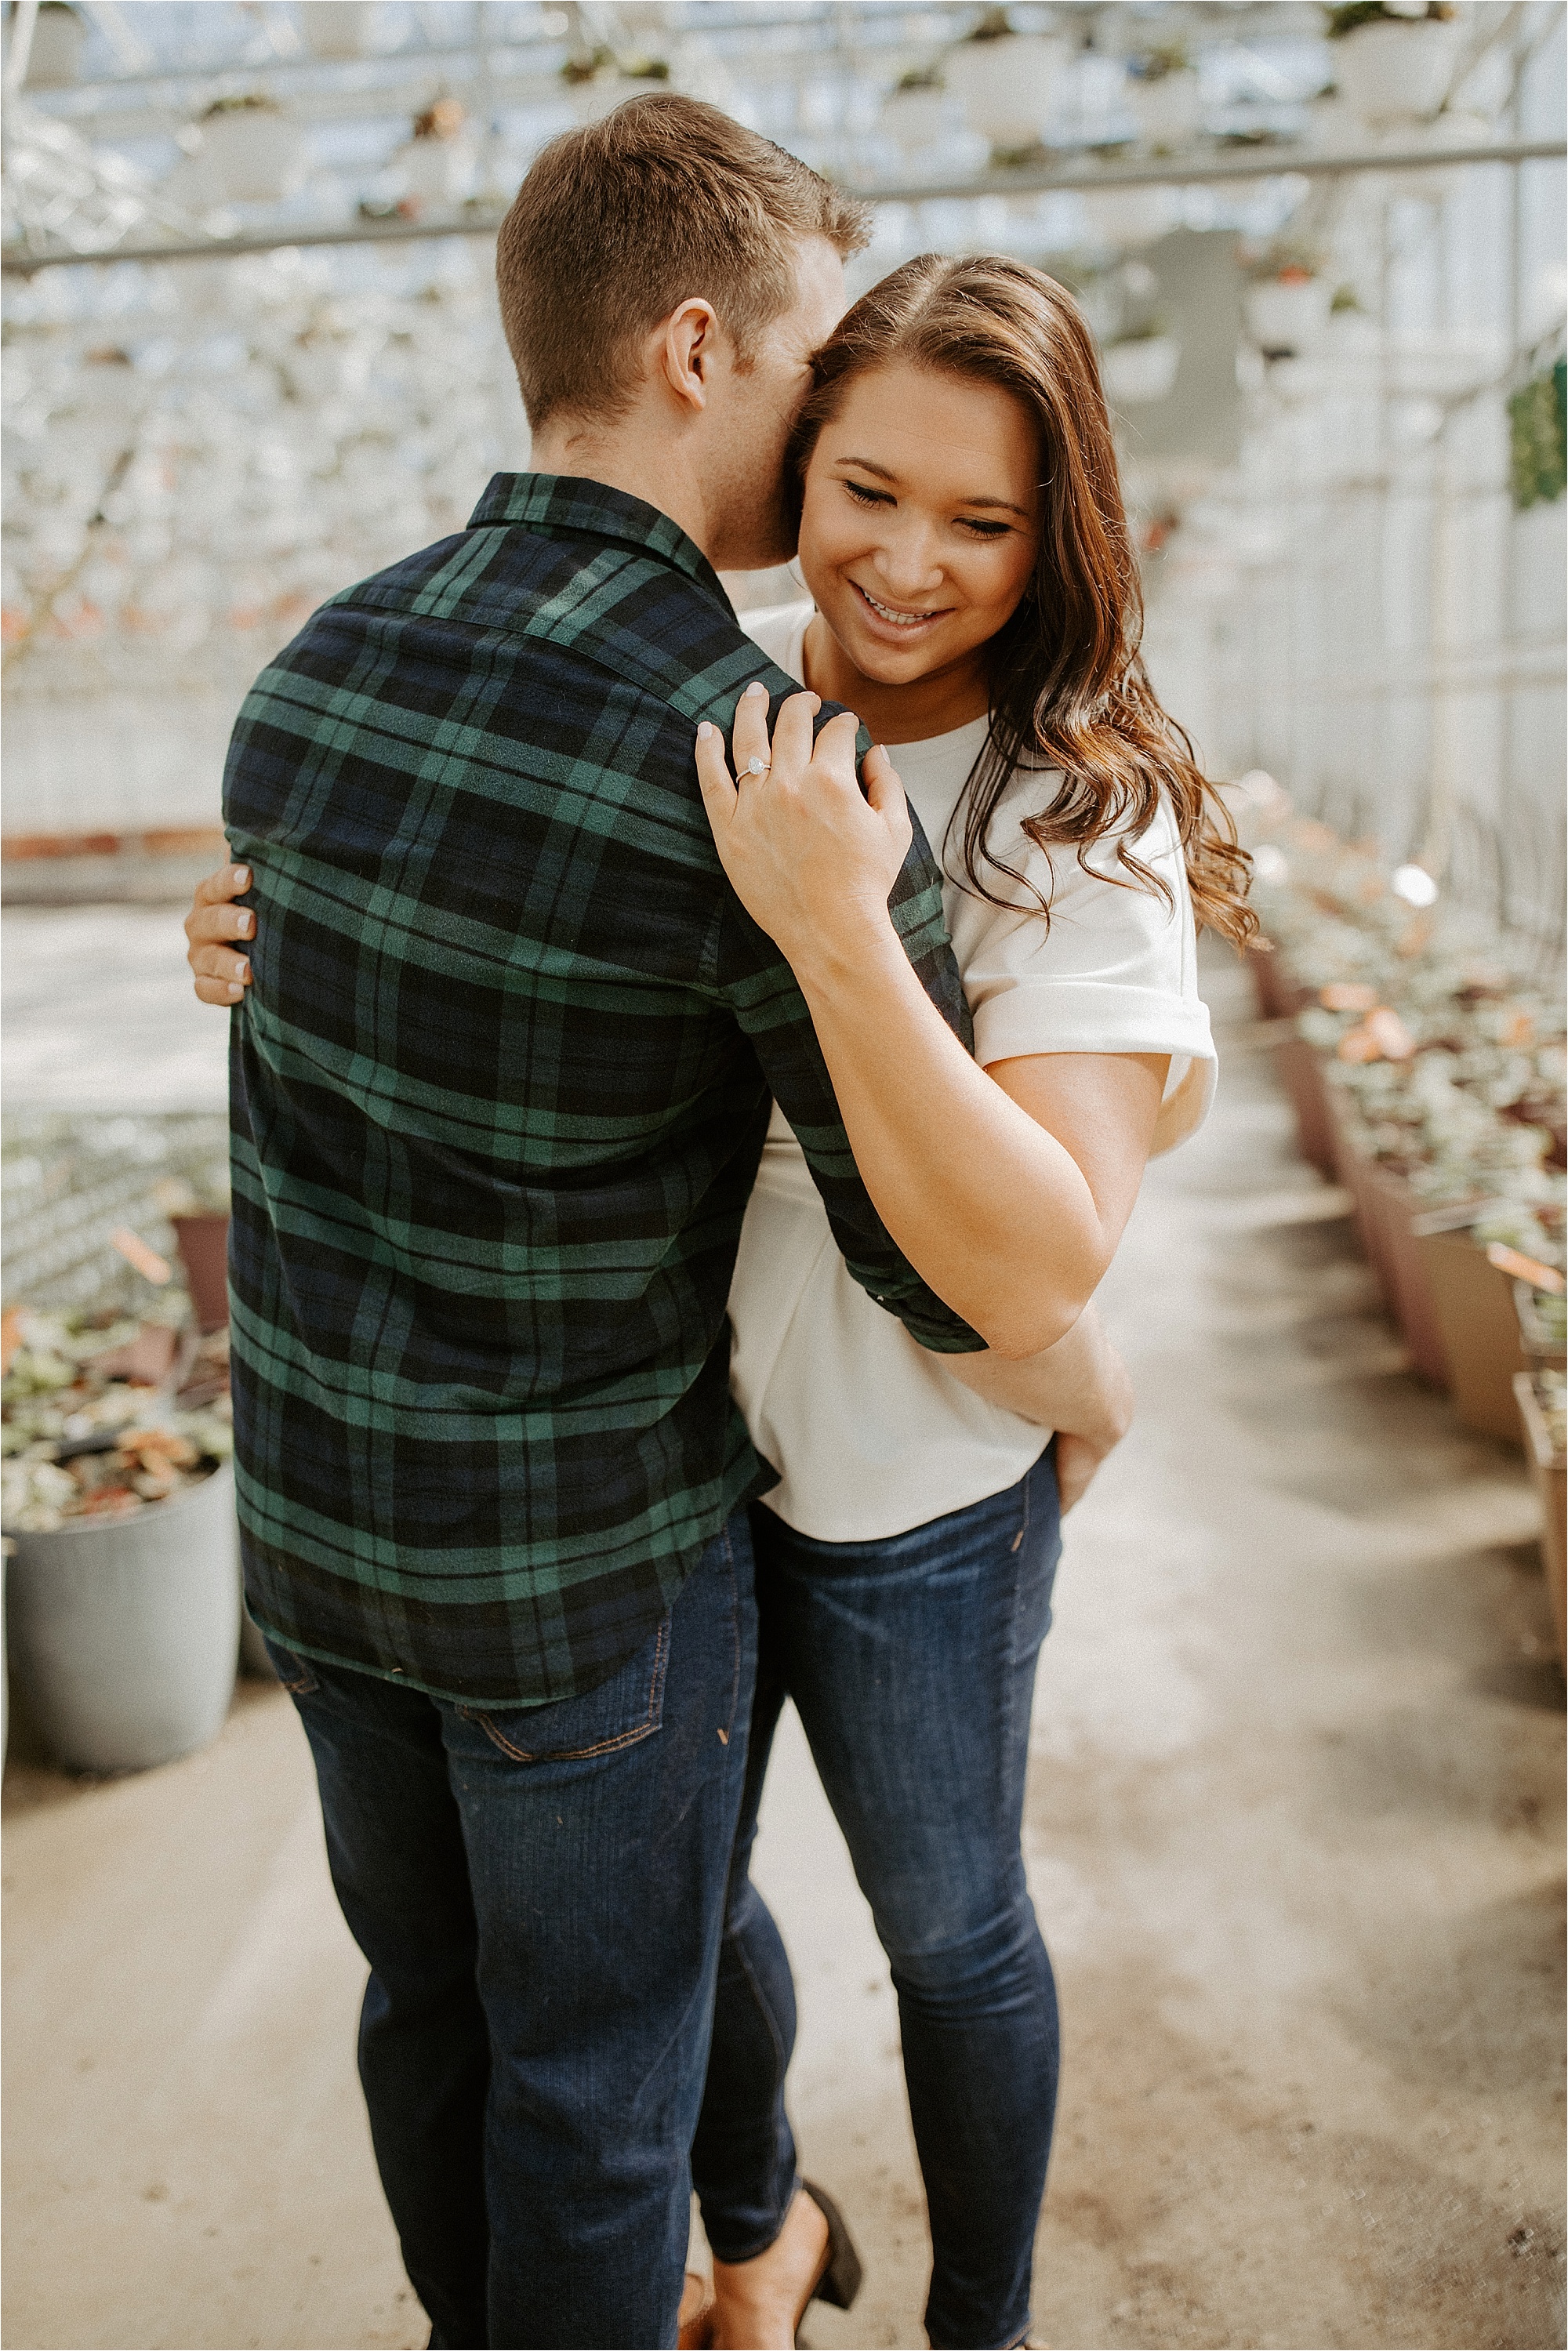 Greenhouse engagement session in Grant Park, IL. Krystal Richmond is a Chicagoland Wedding Photographer. 